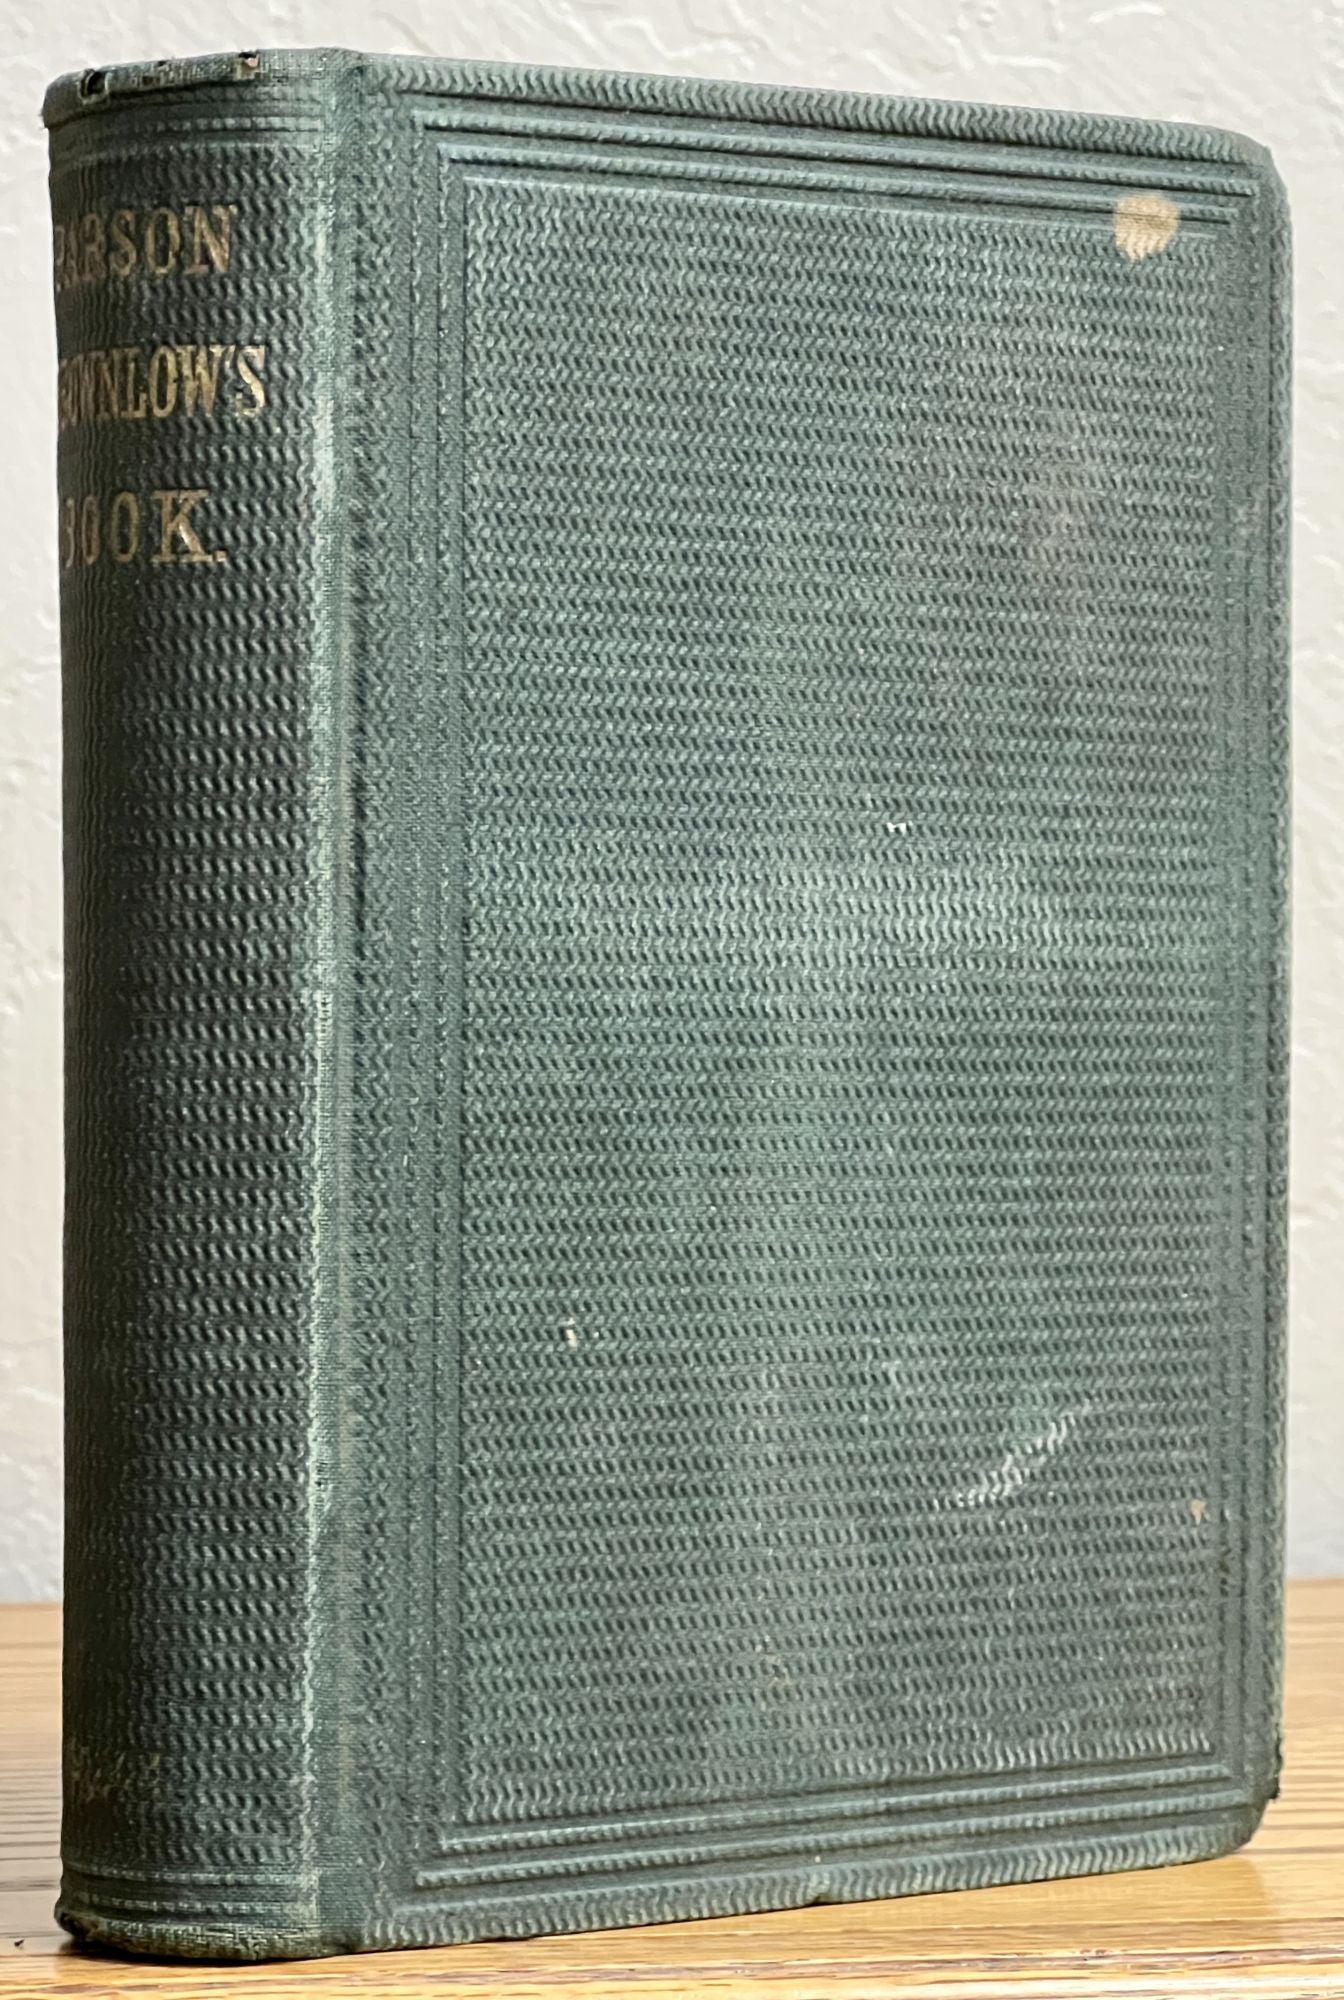 Brownlow, W. G. - SKETCHES Of The RISE, PROGRESS, And DECLINE Of SECESSION; With a Narrative of Personal Adventures Among the Rebels